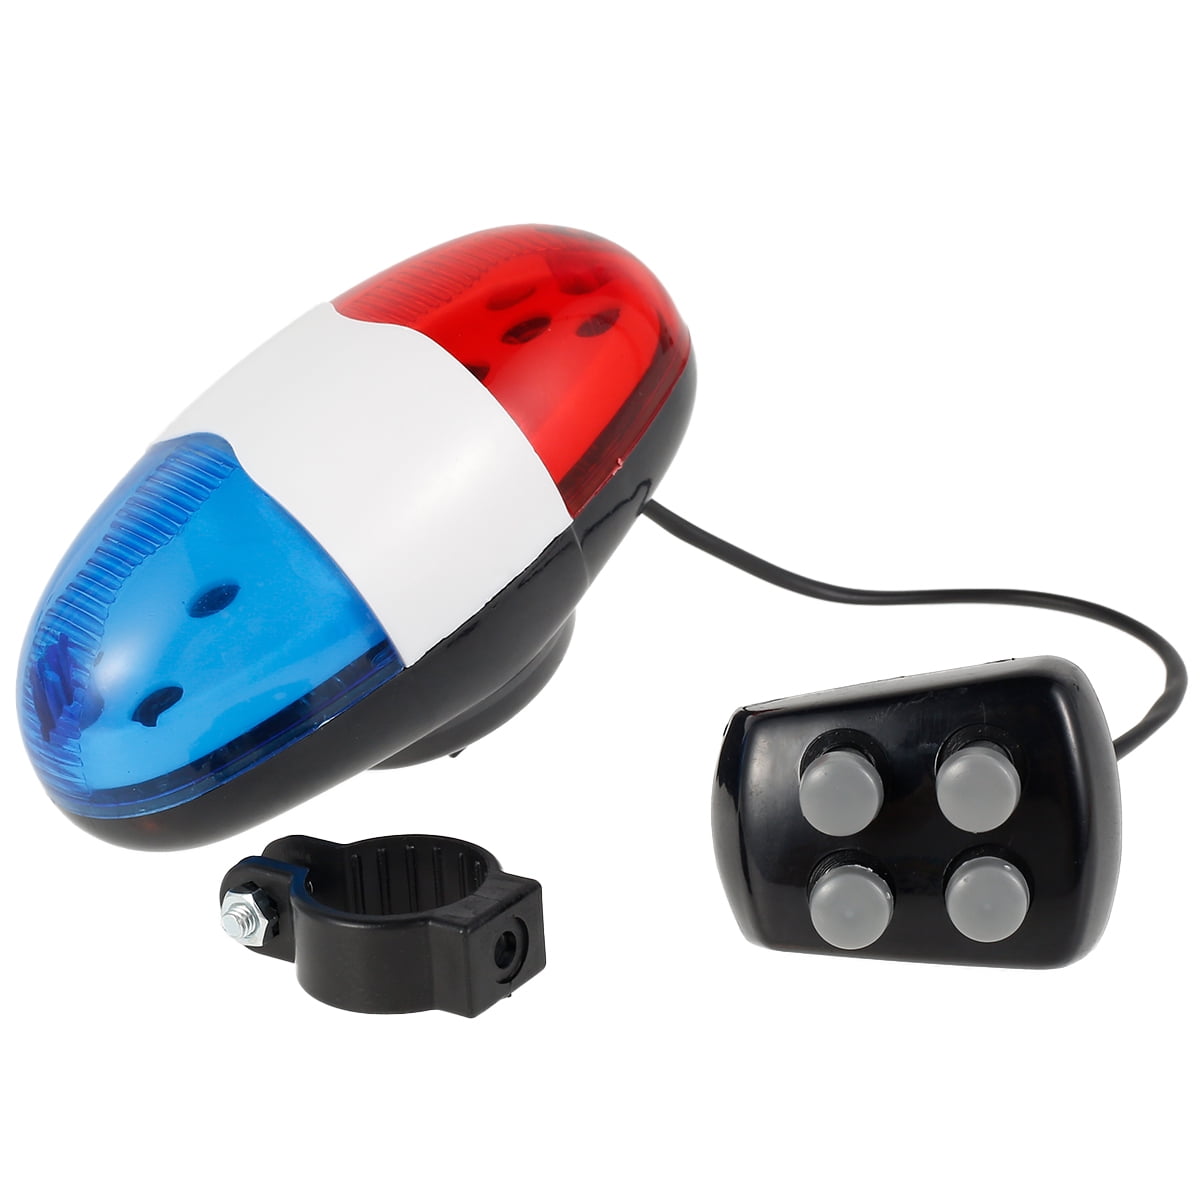 vongcoki Bicycle Bell 6LED 4 Tone Bicycle Horn Invisible Bell LED Bike Police Light Electronic Siren Kids Accessories for Bike Scooter